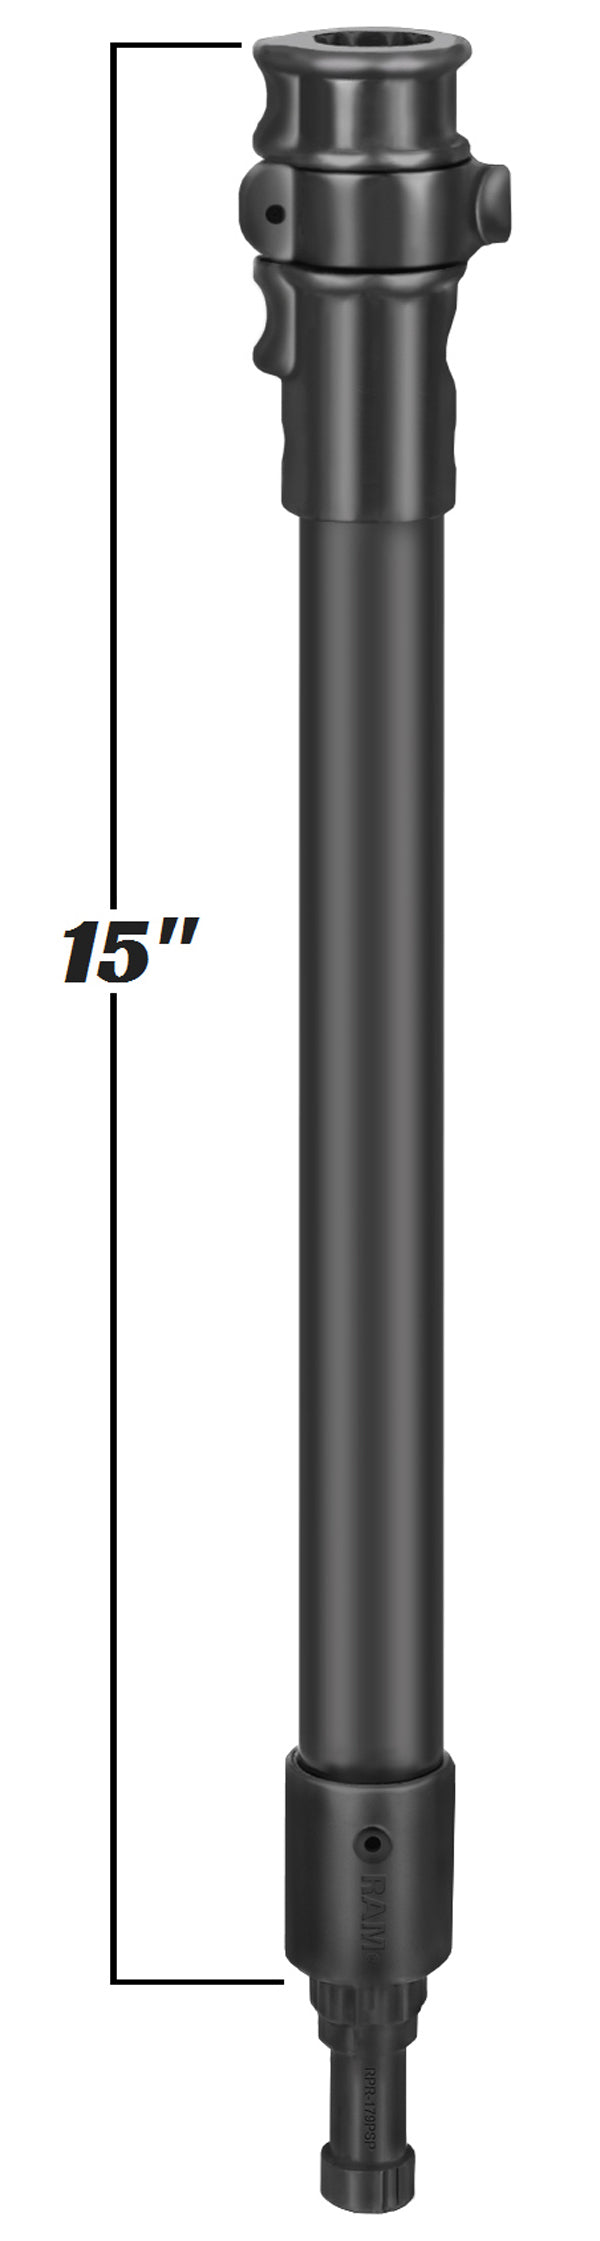 RAM Adapt-A-Post 15" Extension Pole